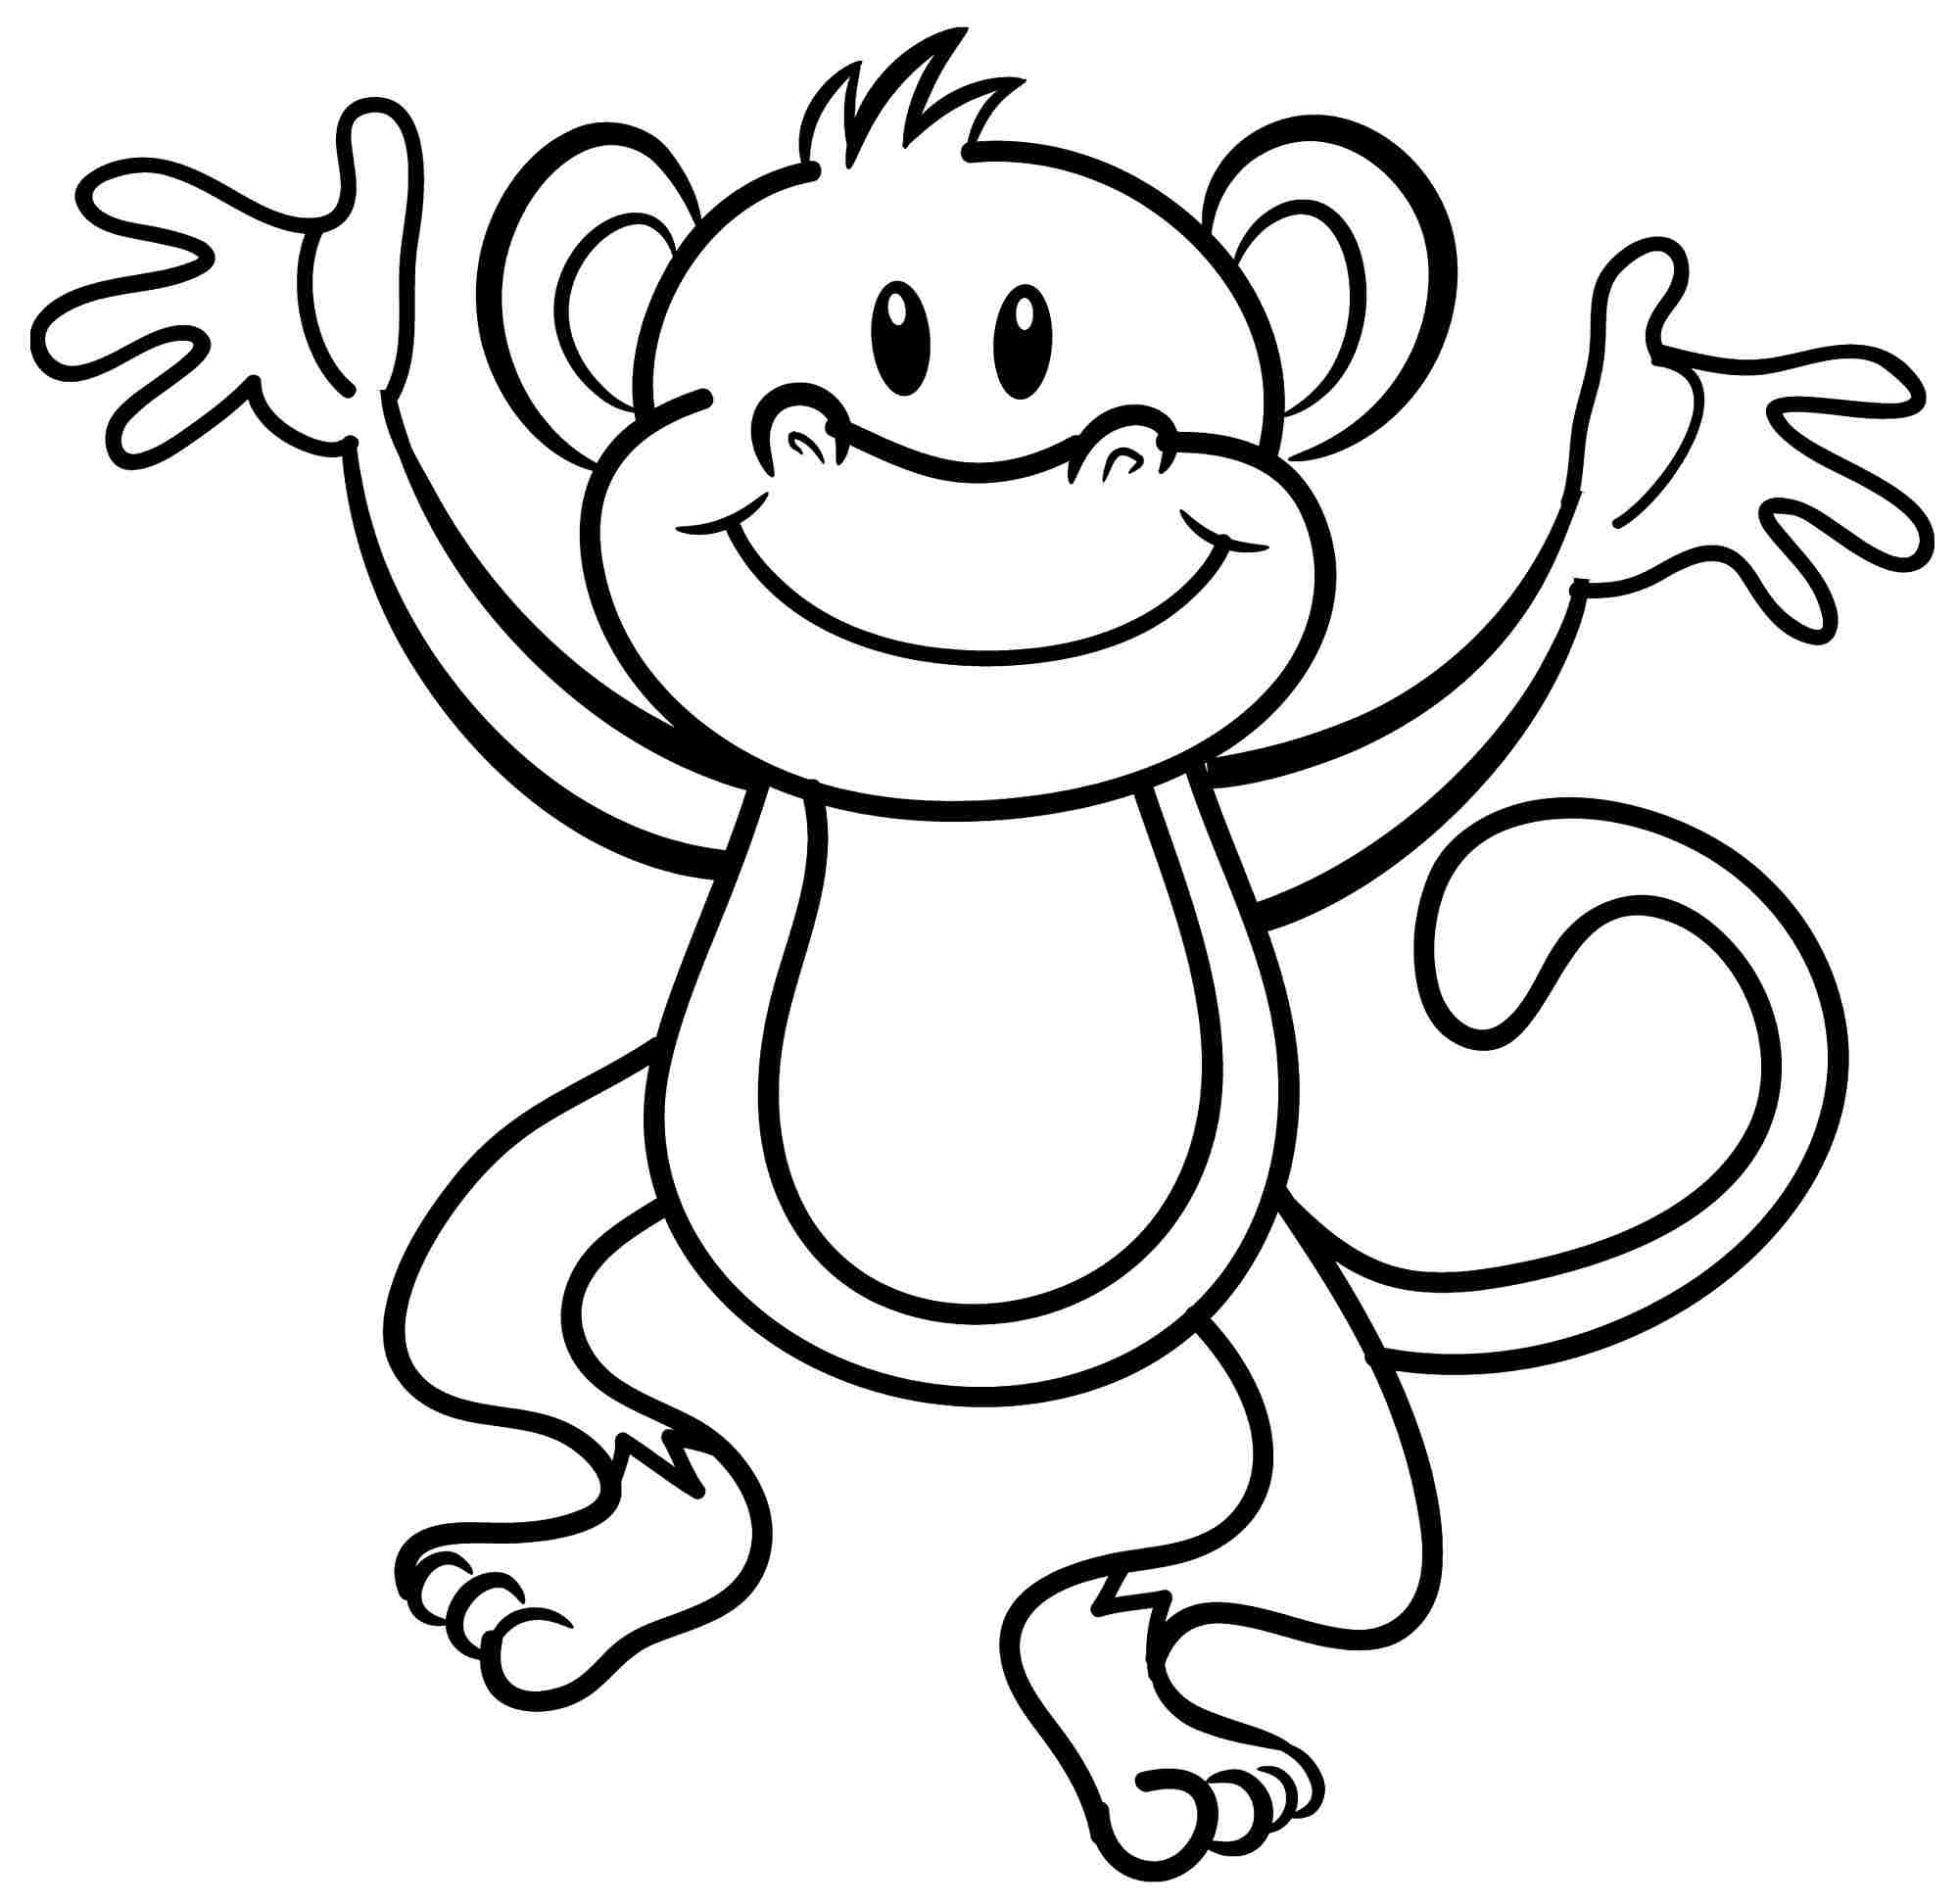 pictures of monkeys to color free monkey coloring pages pictures to color of monkeys